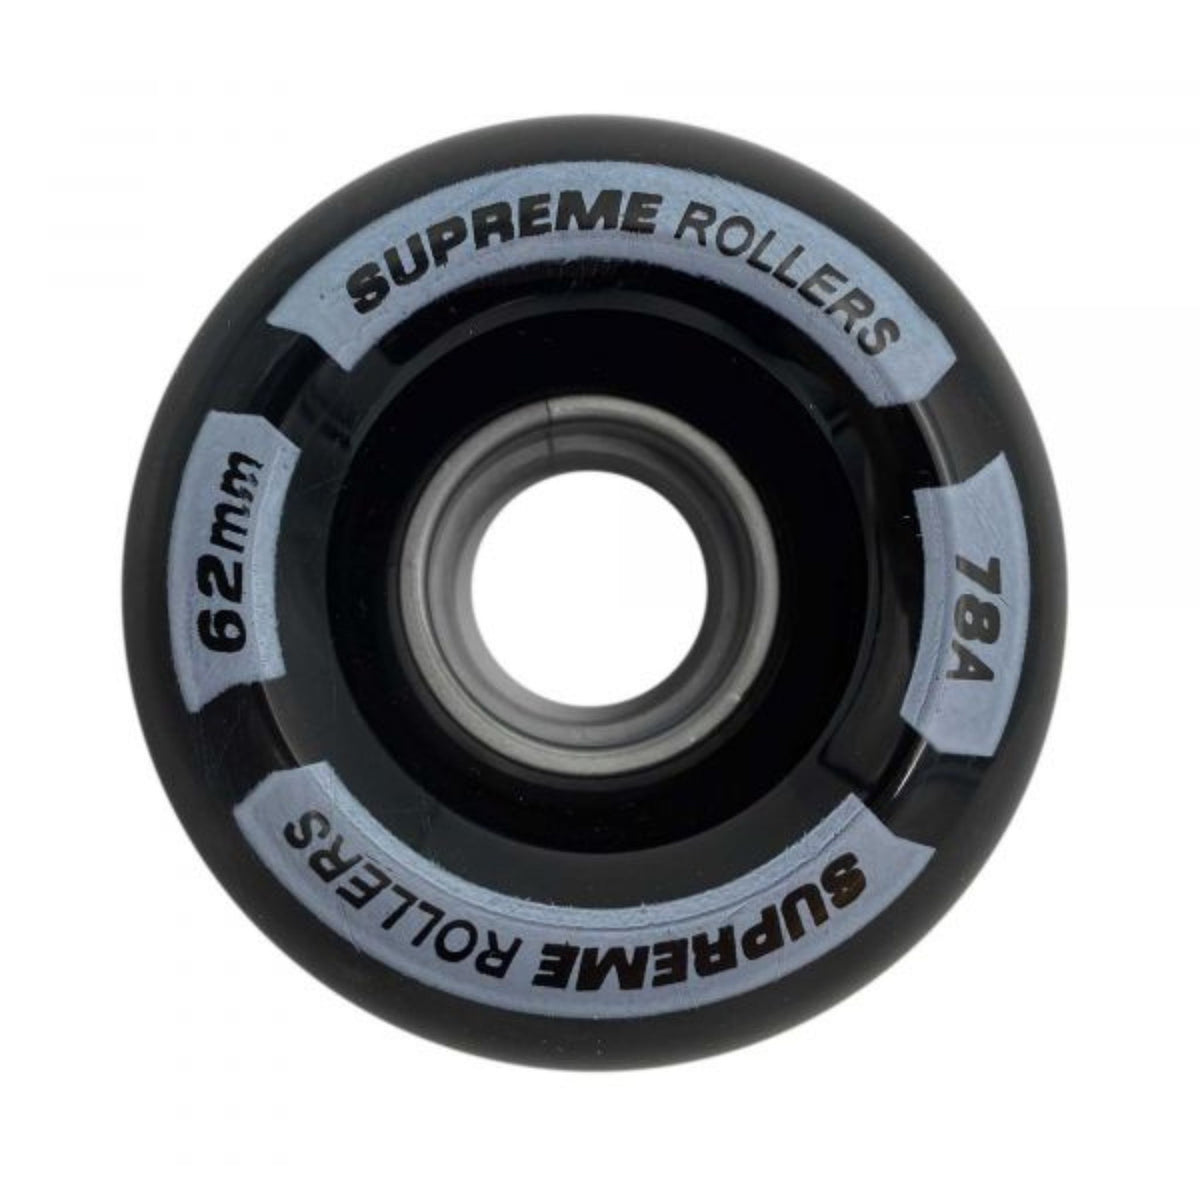 Supreme Rollers Quad Wheels 62mm/78A- Set of 4 - Roller Skates Parts and Accessories | JT Skate